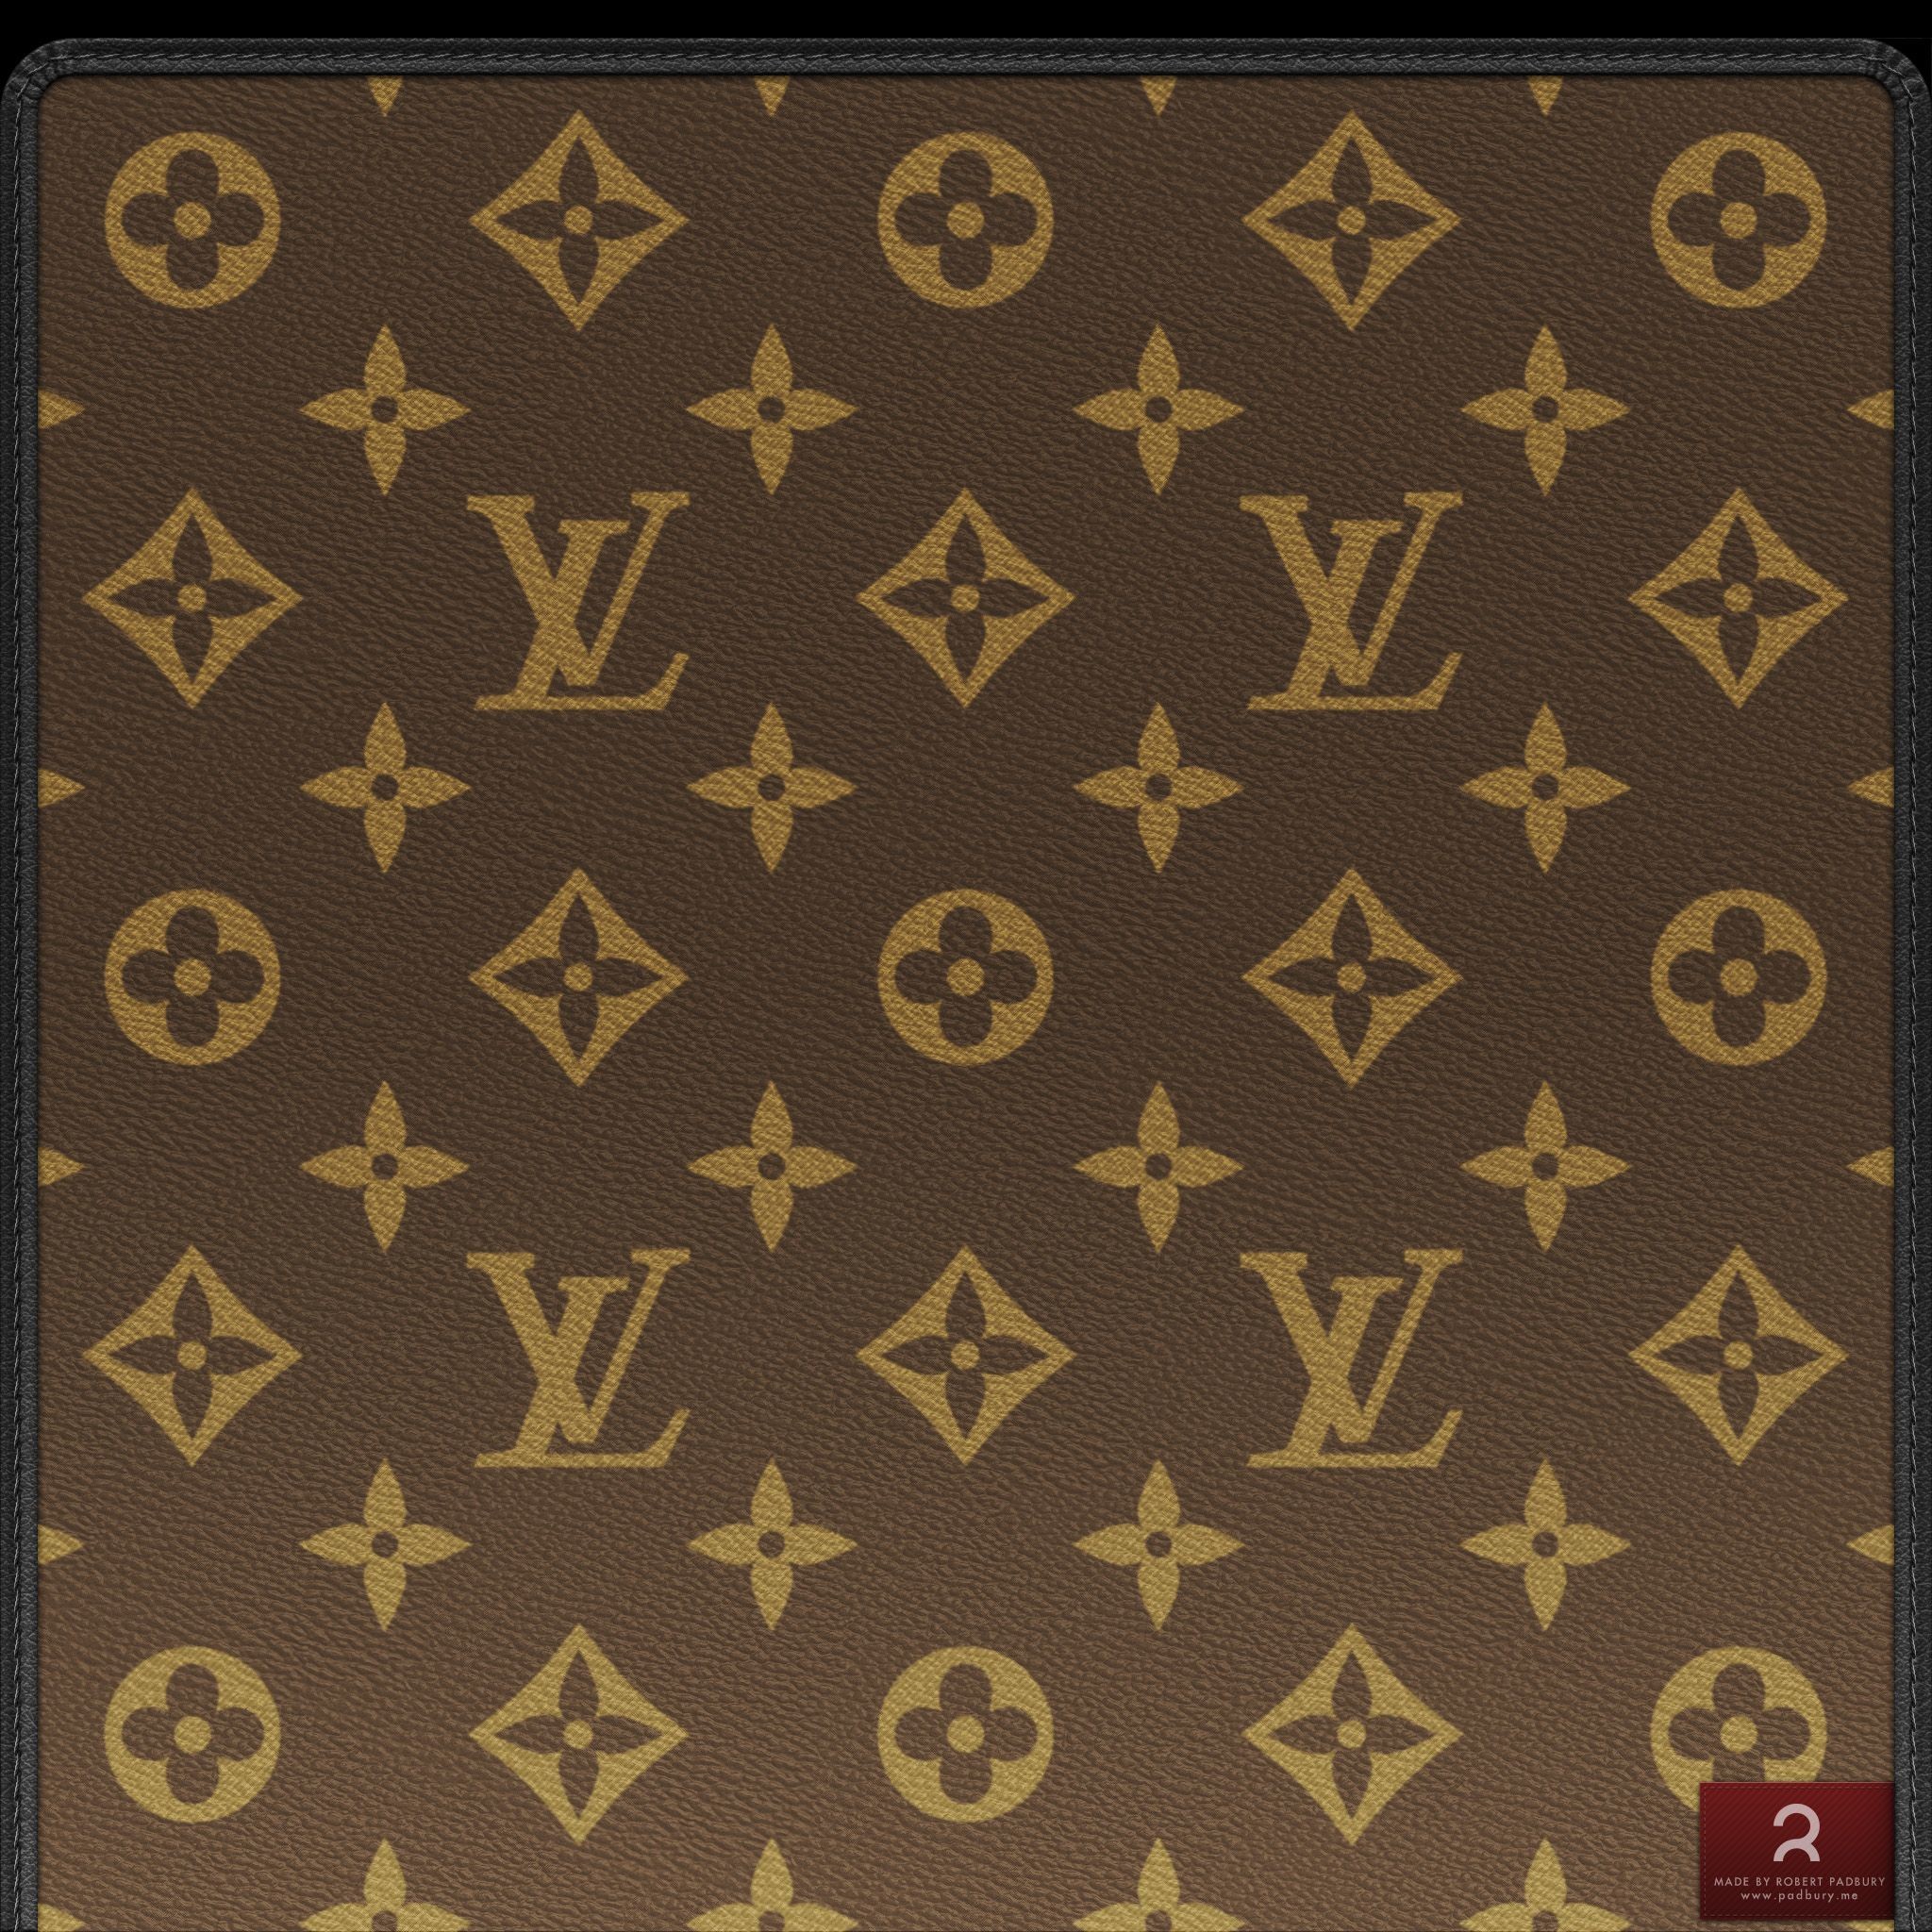 2048x2048 Dribbble - Louis Vuitton Retina Display Wallpaper Collection by .